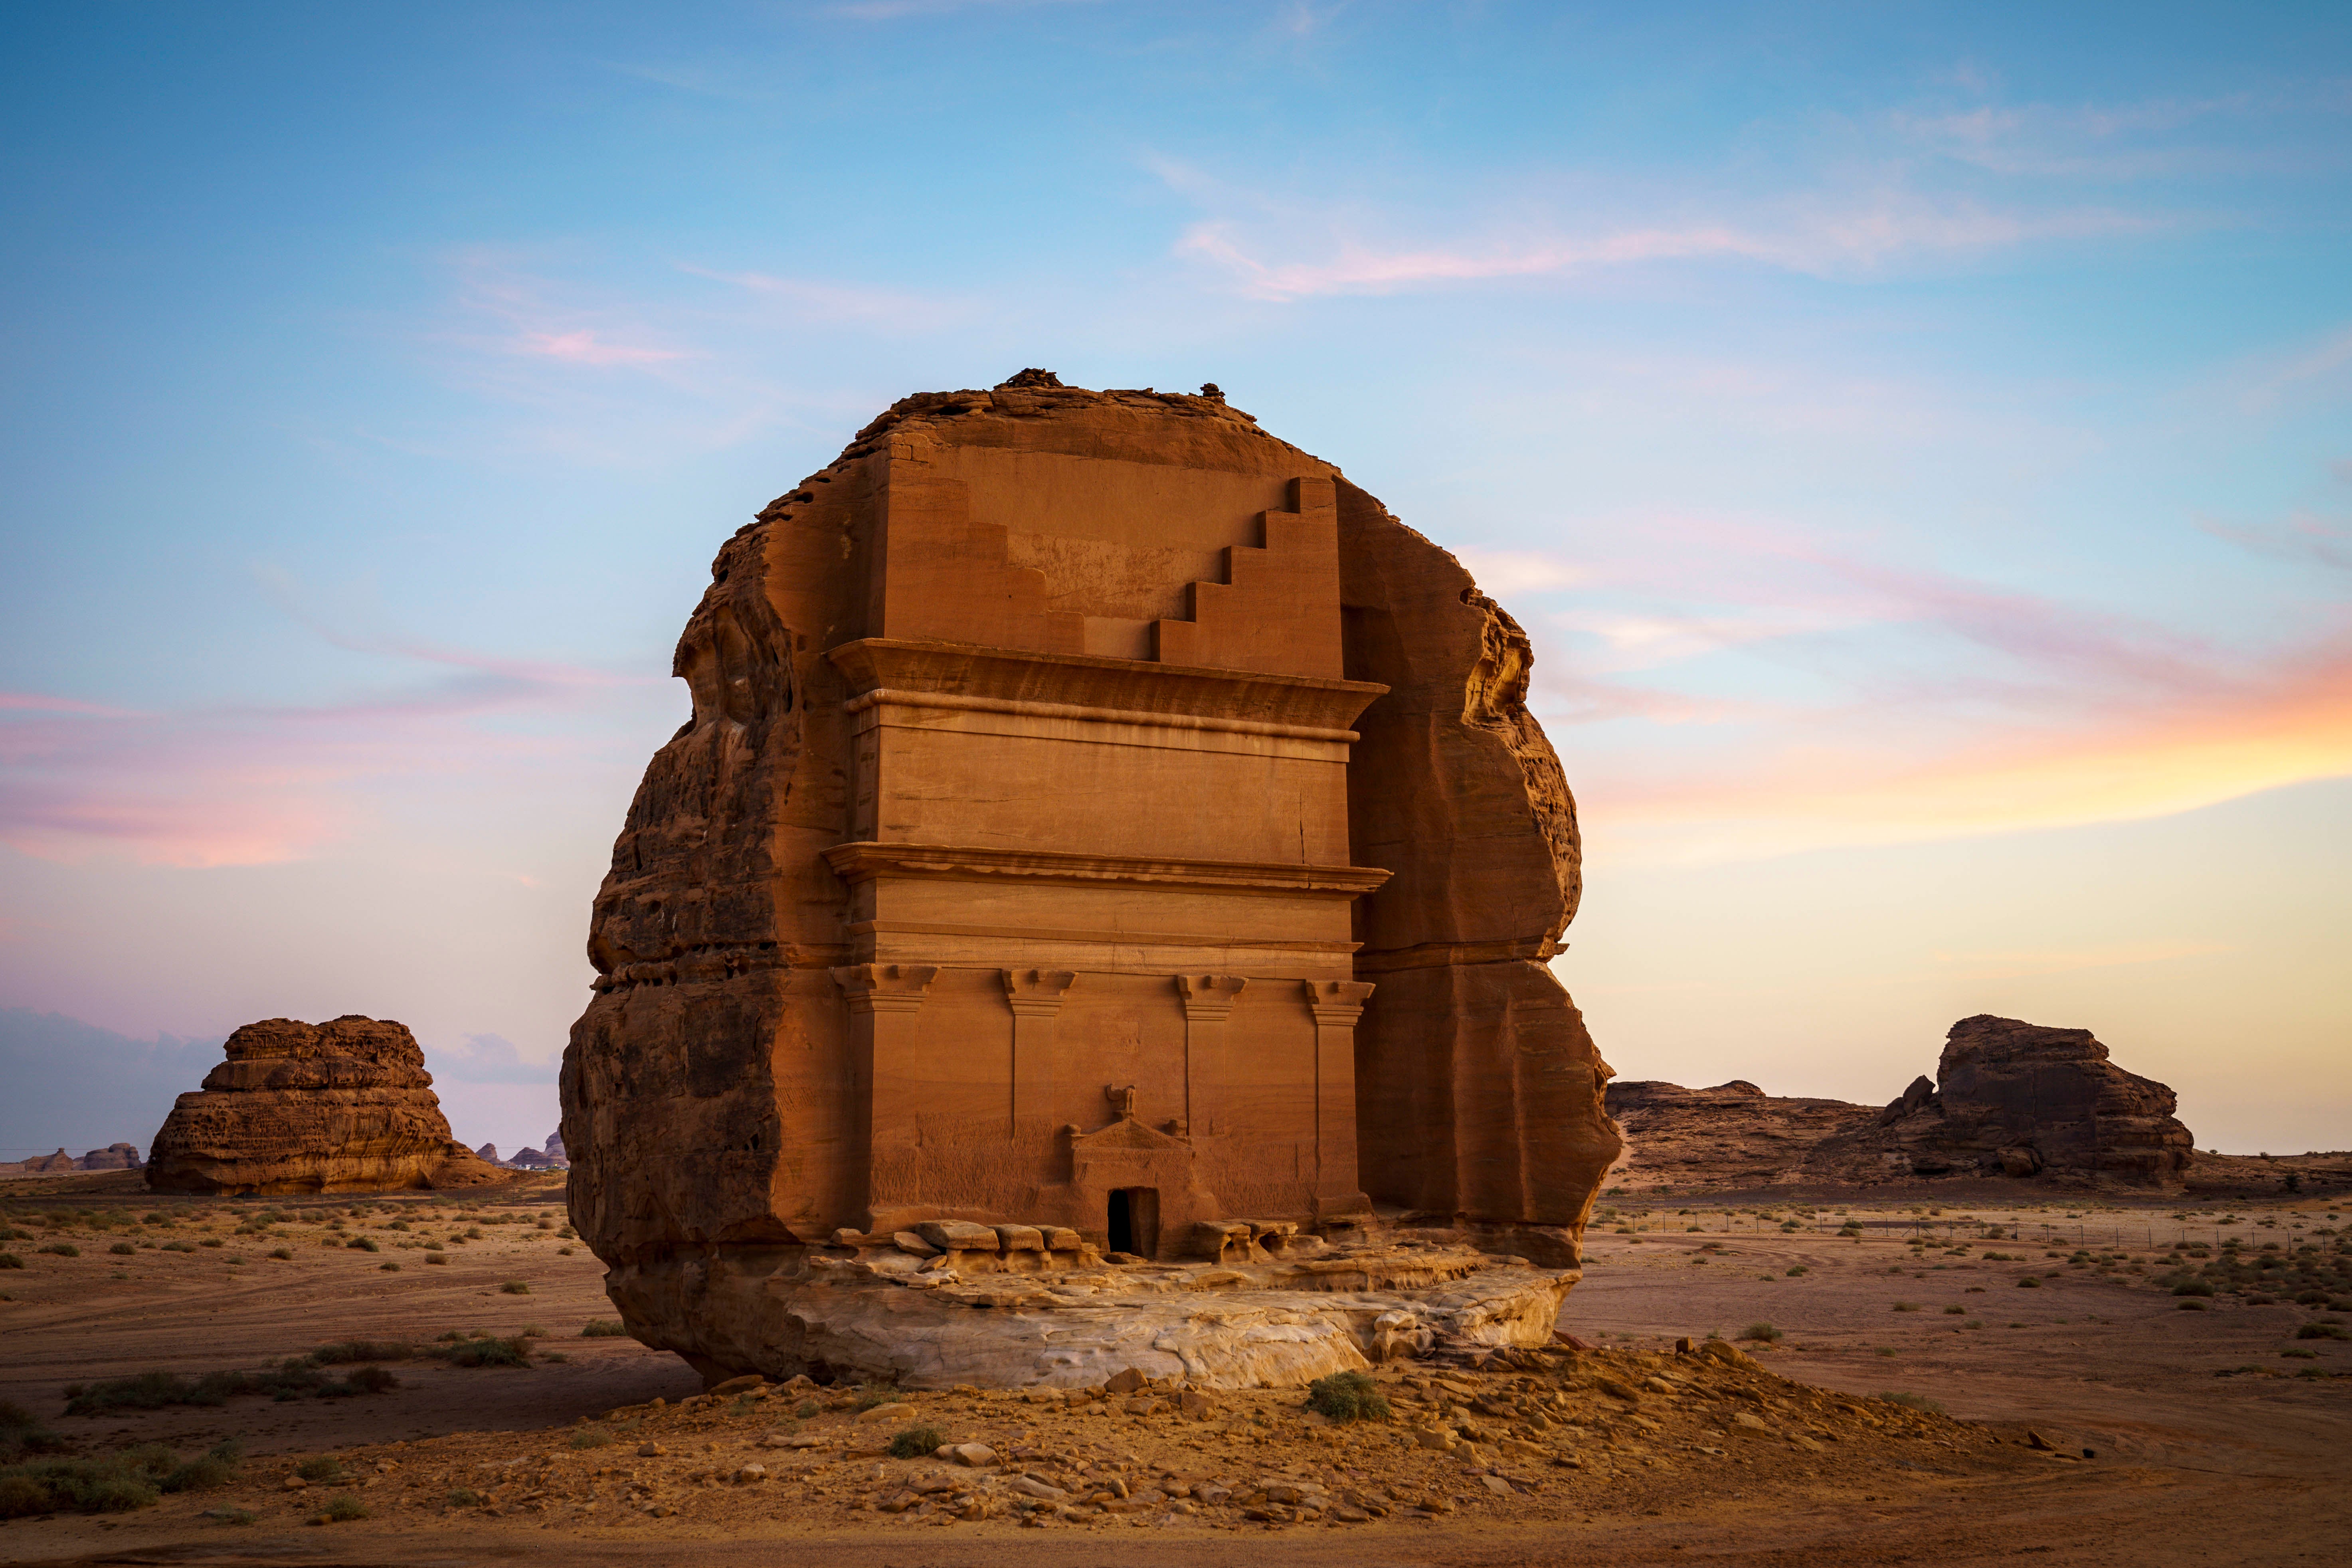 Built millennia ago, the city of Hegra was built by the Nabataeans and features incredibly preserved tombs